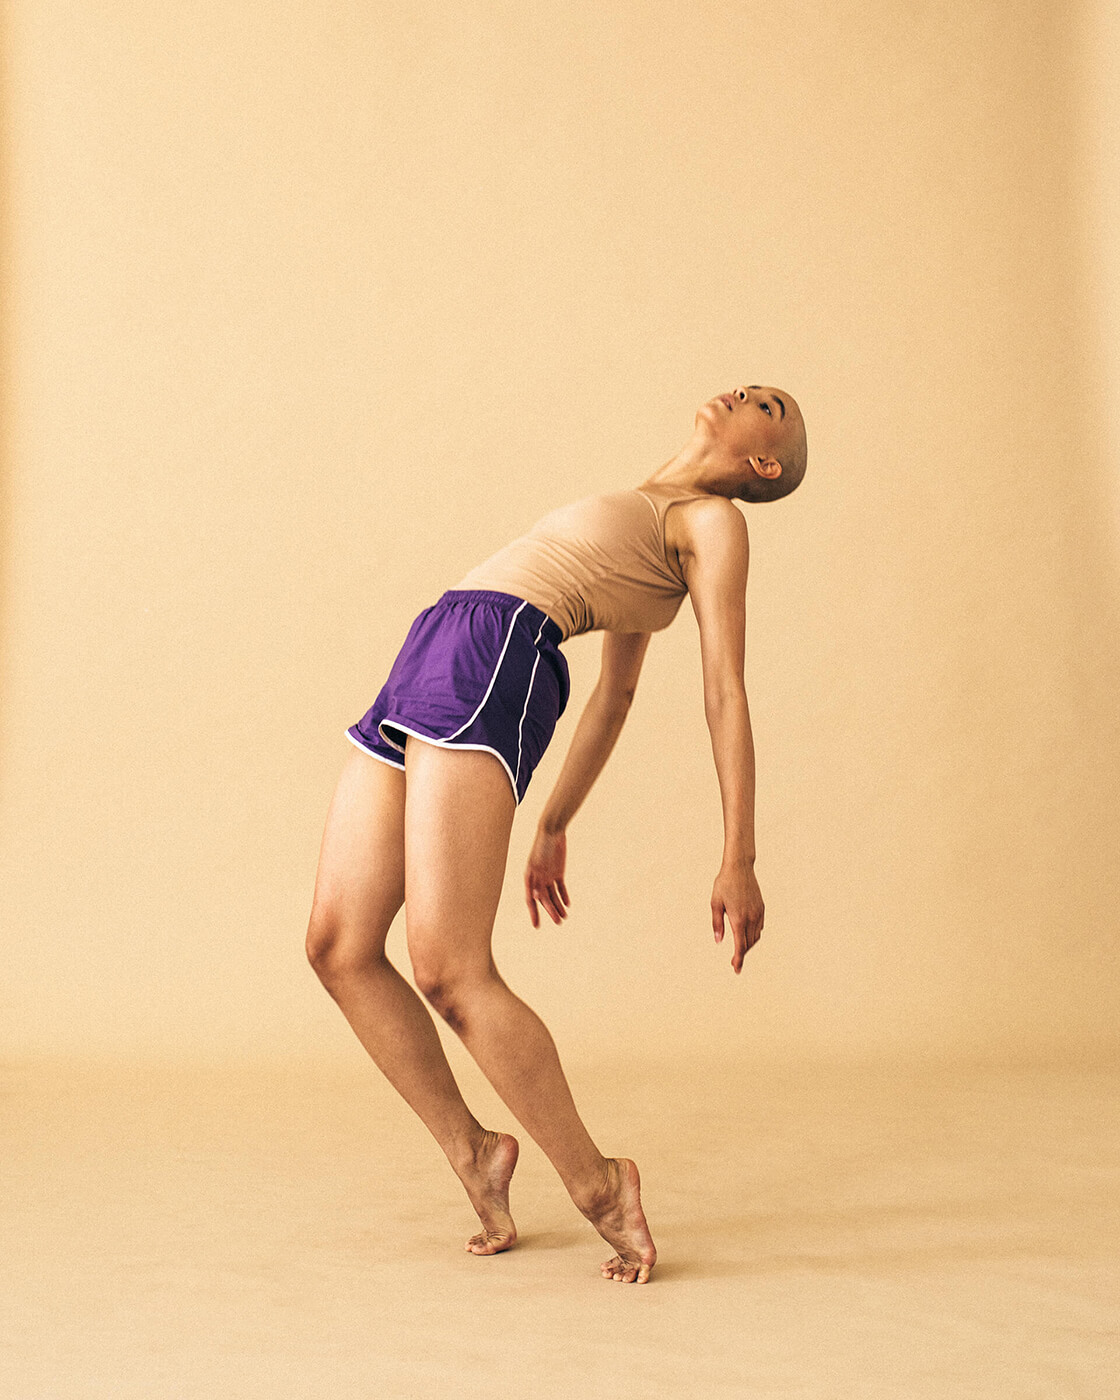 A girl dancing in the studio wearing violet shorts